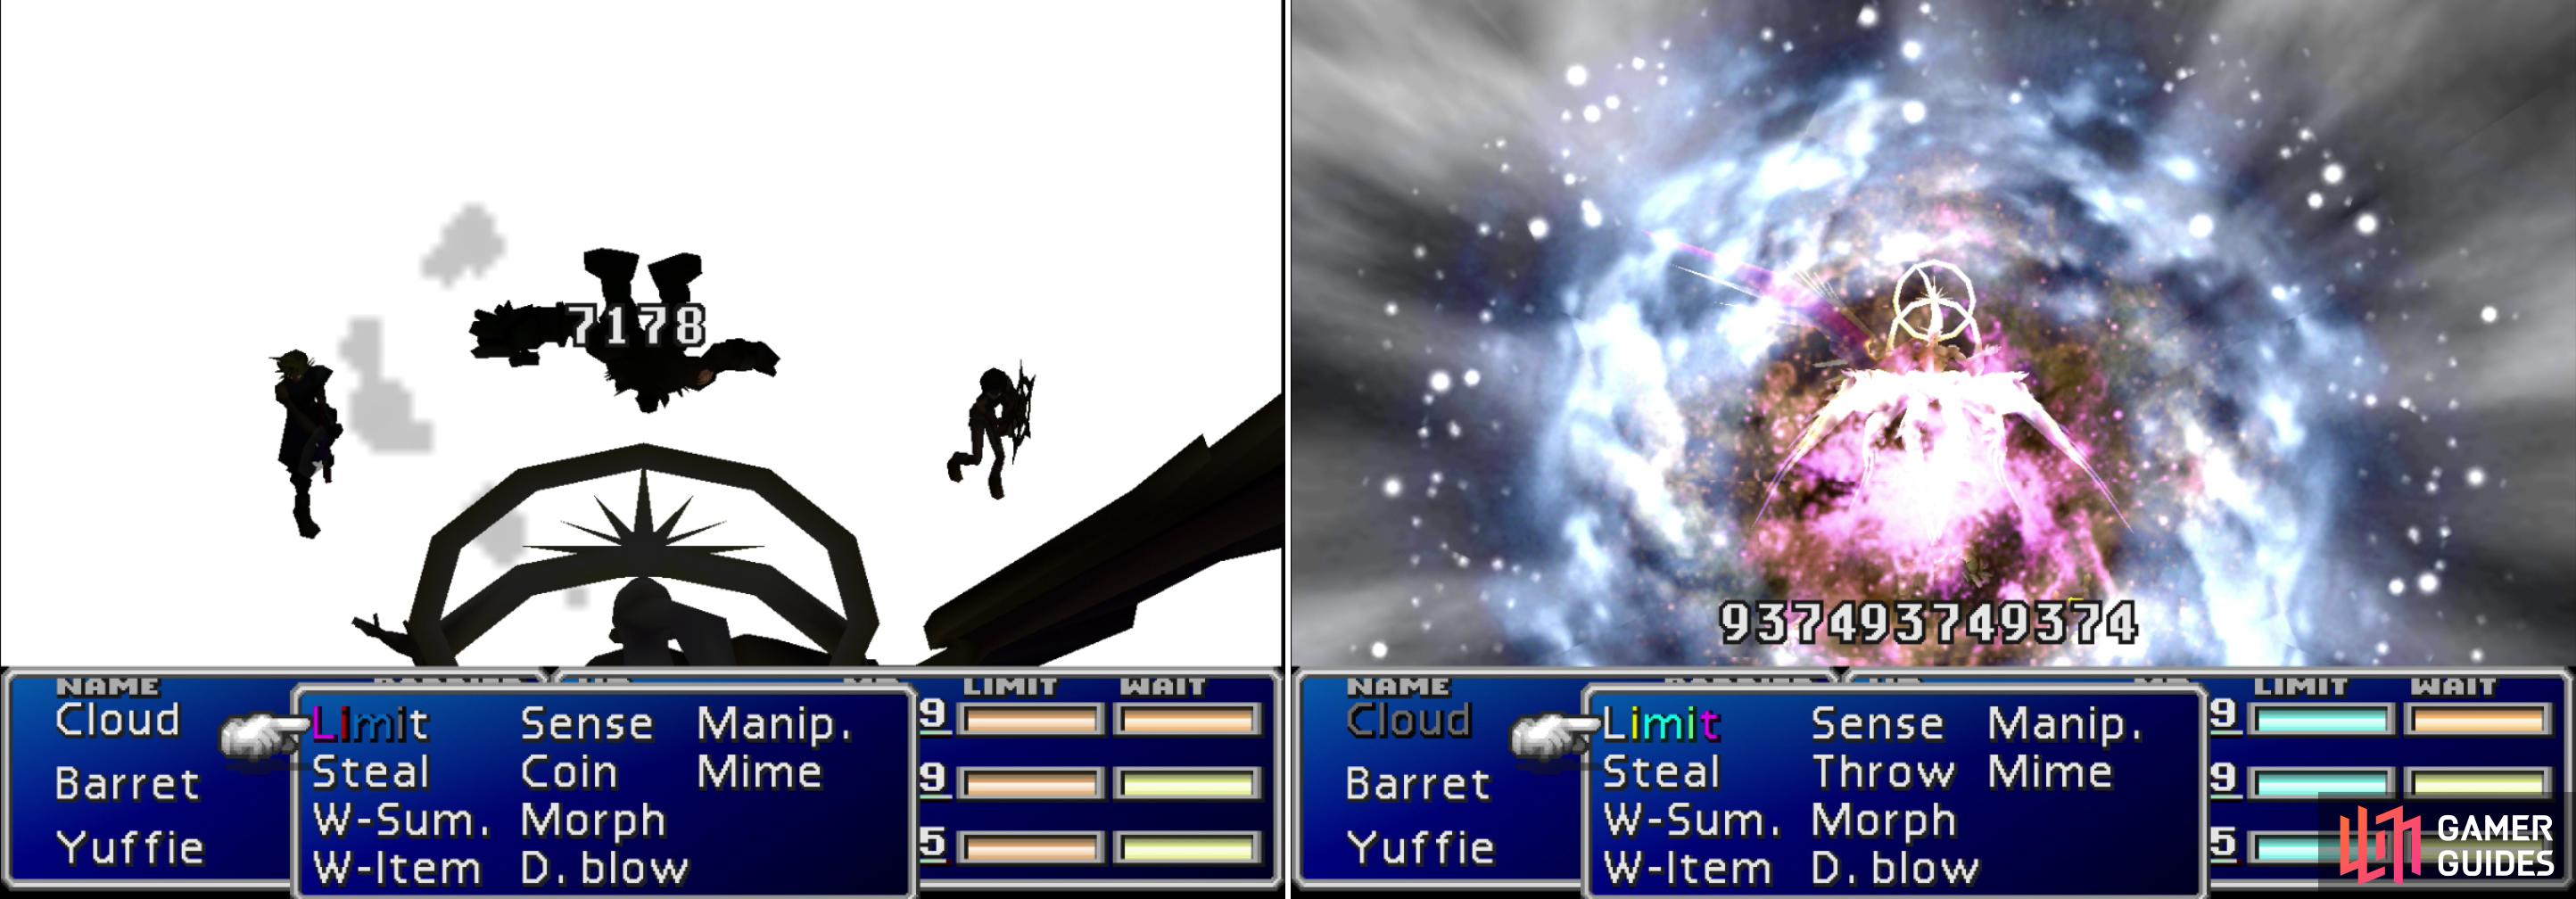 Safer Sephiroths Shadow Flare attack can deal massive damage to one character (left). But his most danger - and absurdly elaborate - attack is Super Nova, which inflicts a number of status effects and reduces all party members to 1/16th of their current HP (right).